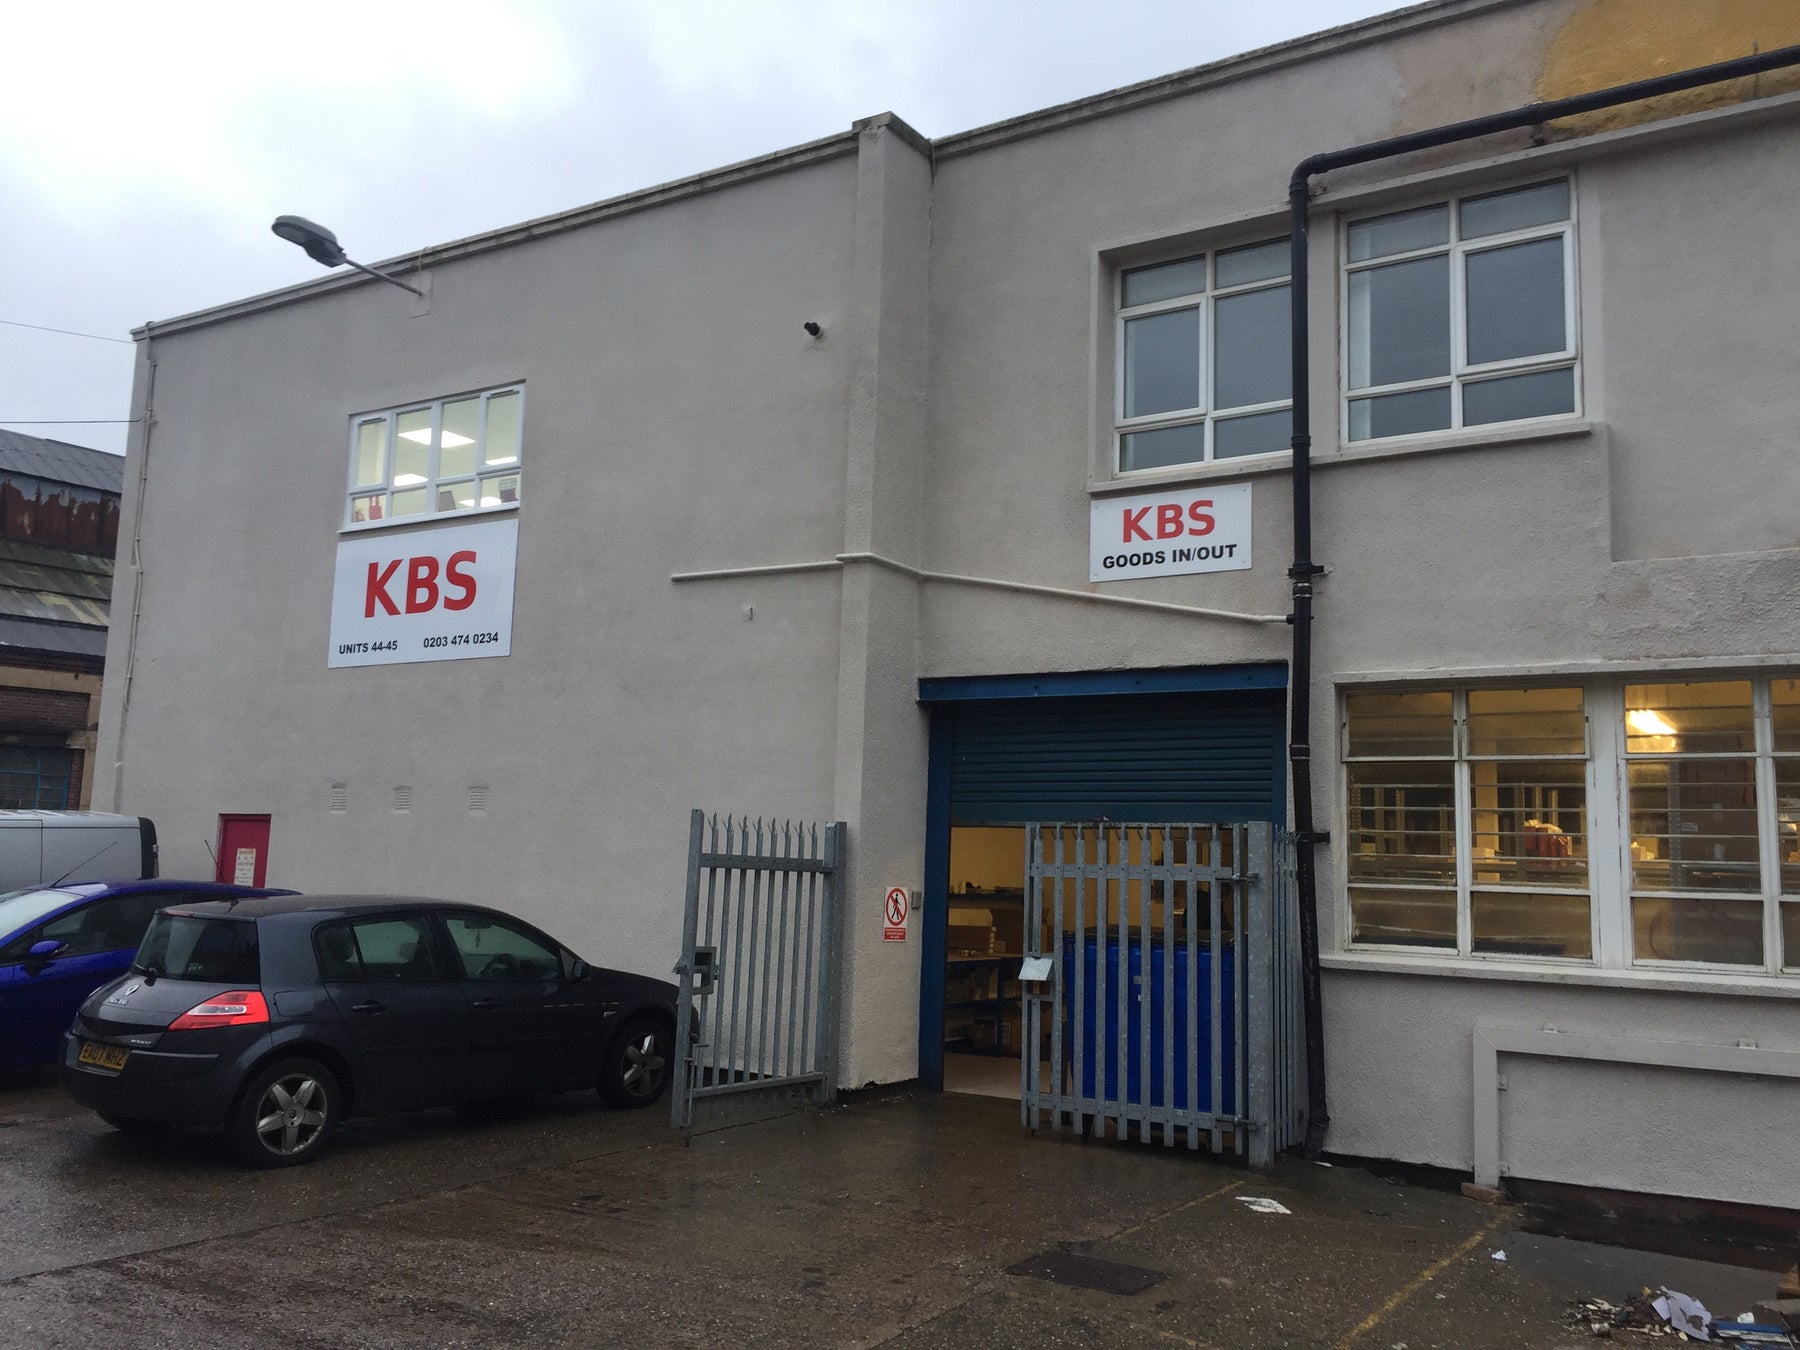 KBS have now moved premises!